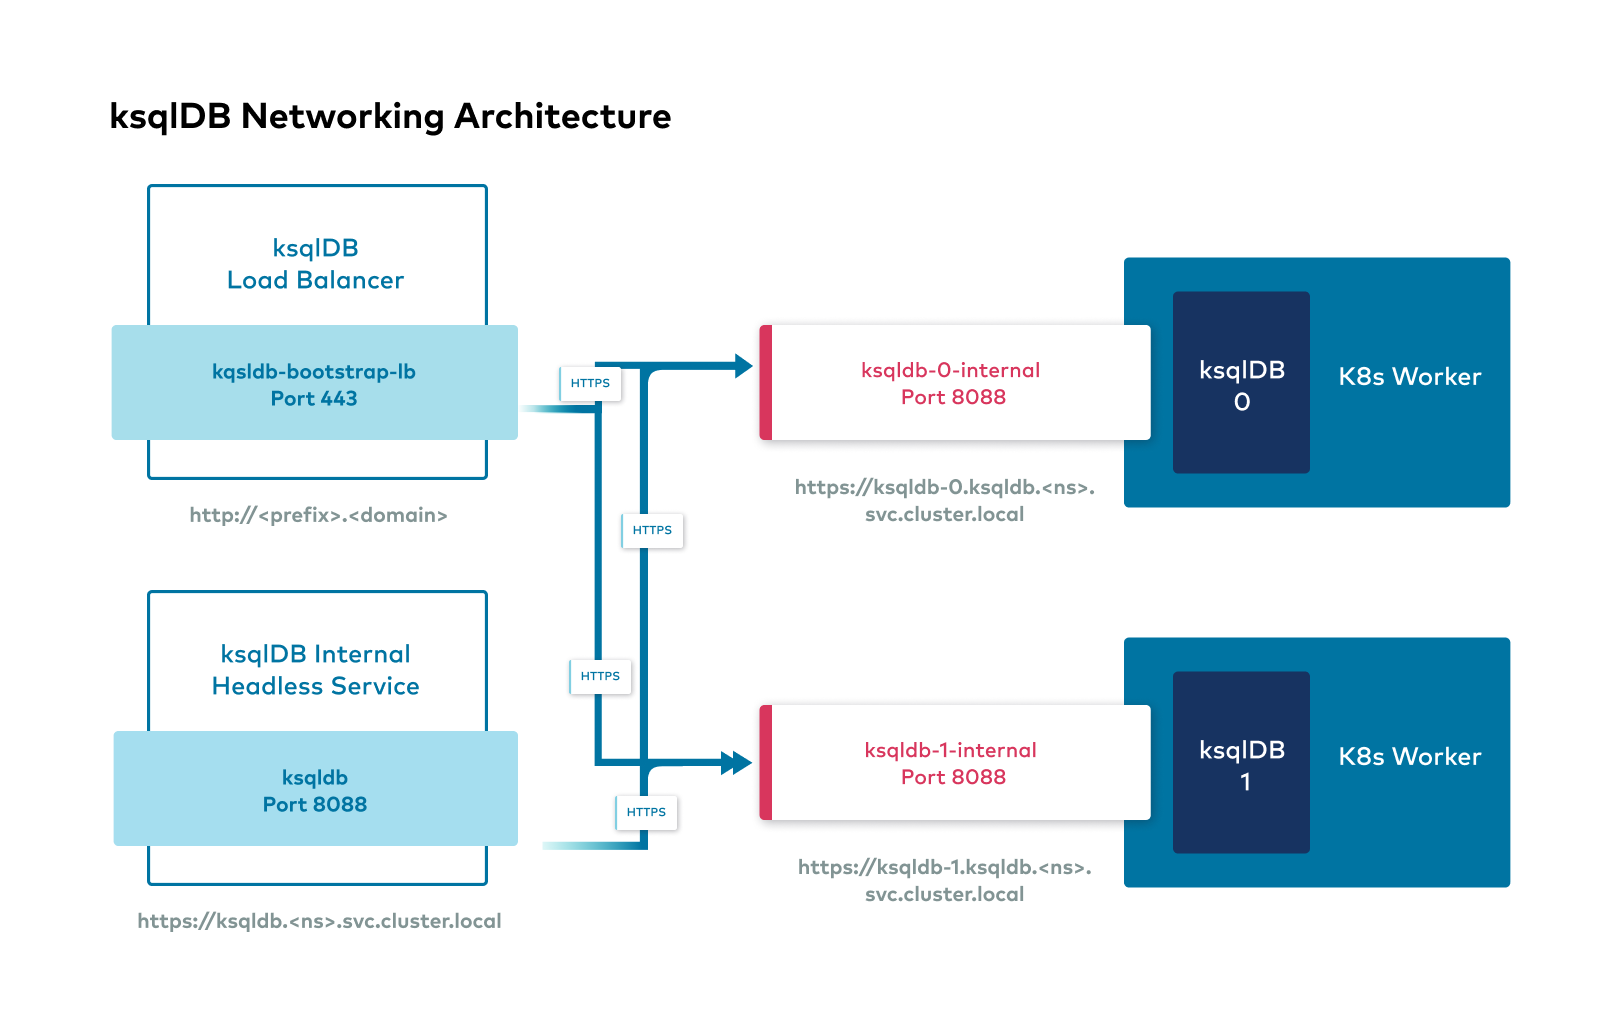 _images/20210428-ksqlDB-Networking-Architecture.png